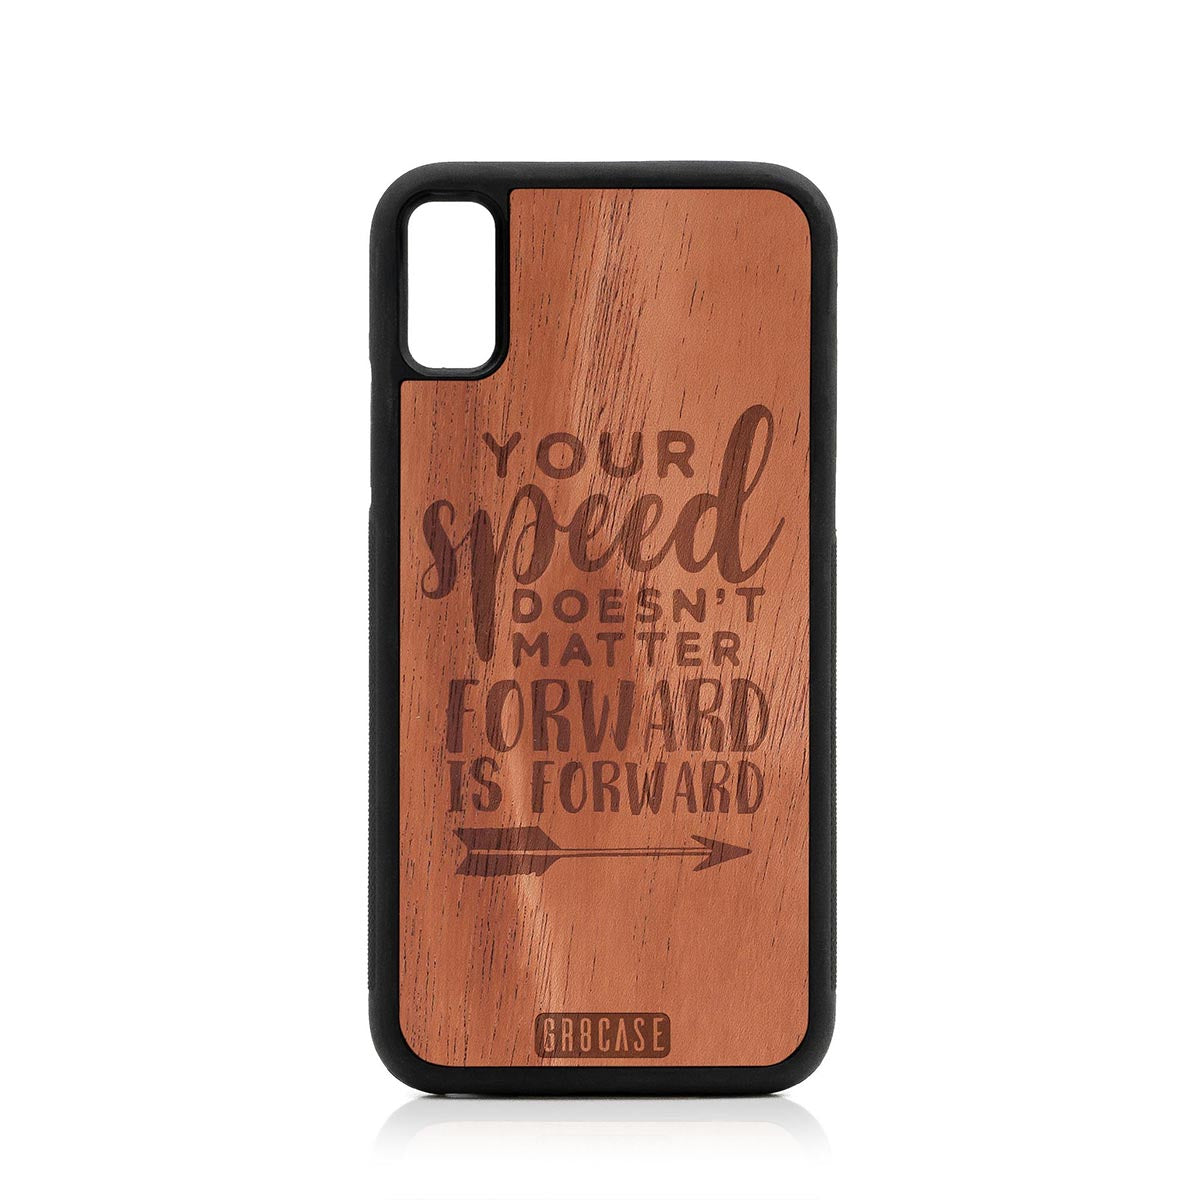 Your Speed Doesn't Matter Forward Is Forward Design Wood Case For iPhone X/XS